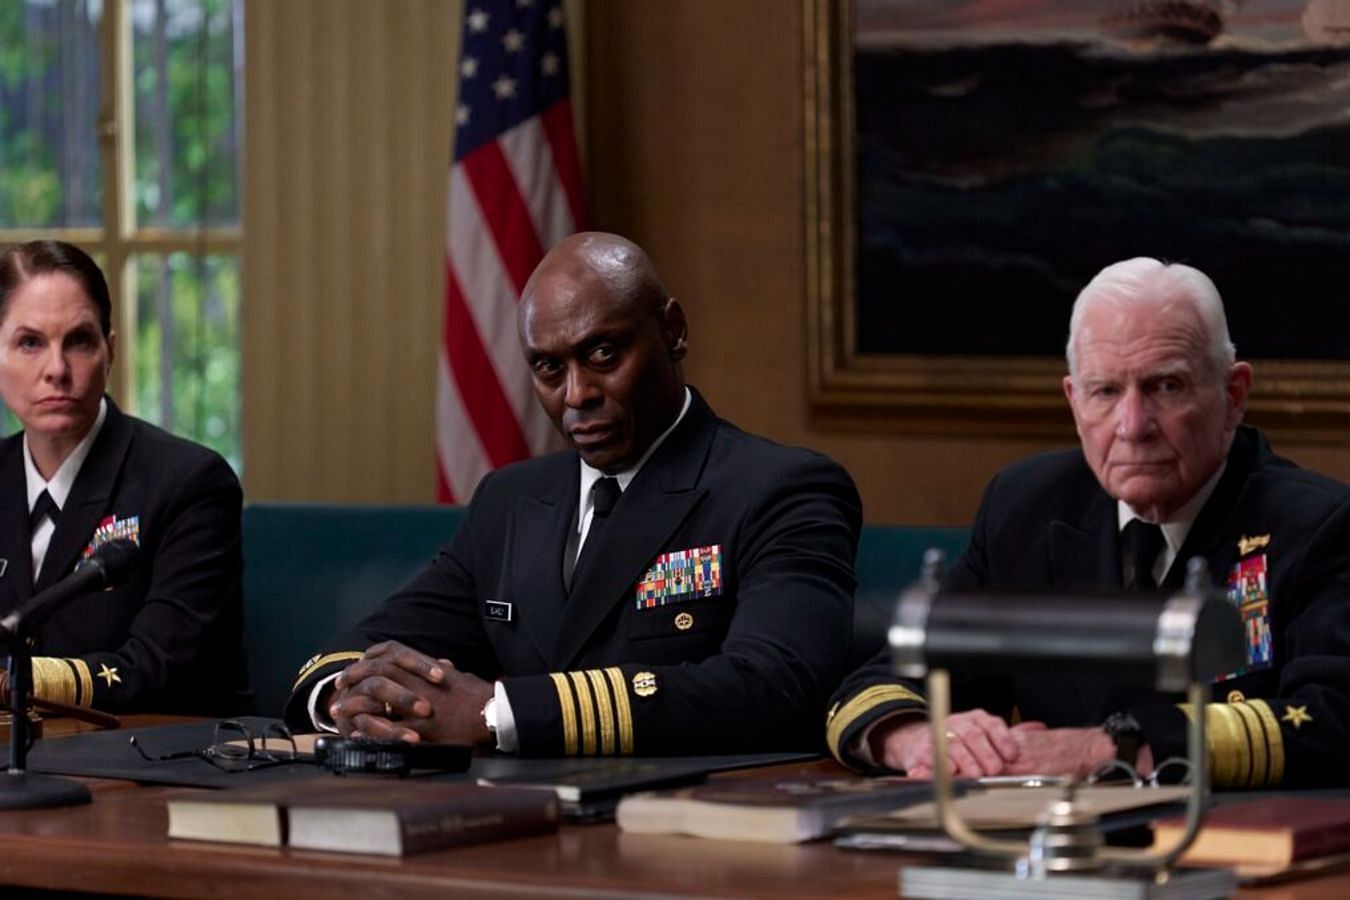 The Caine Mutiny CourtMartial Release date, trailer, and more